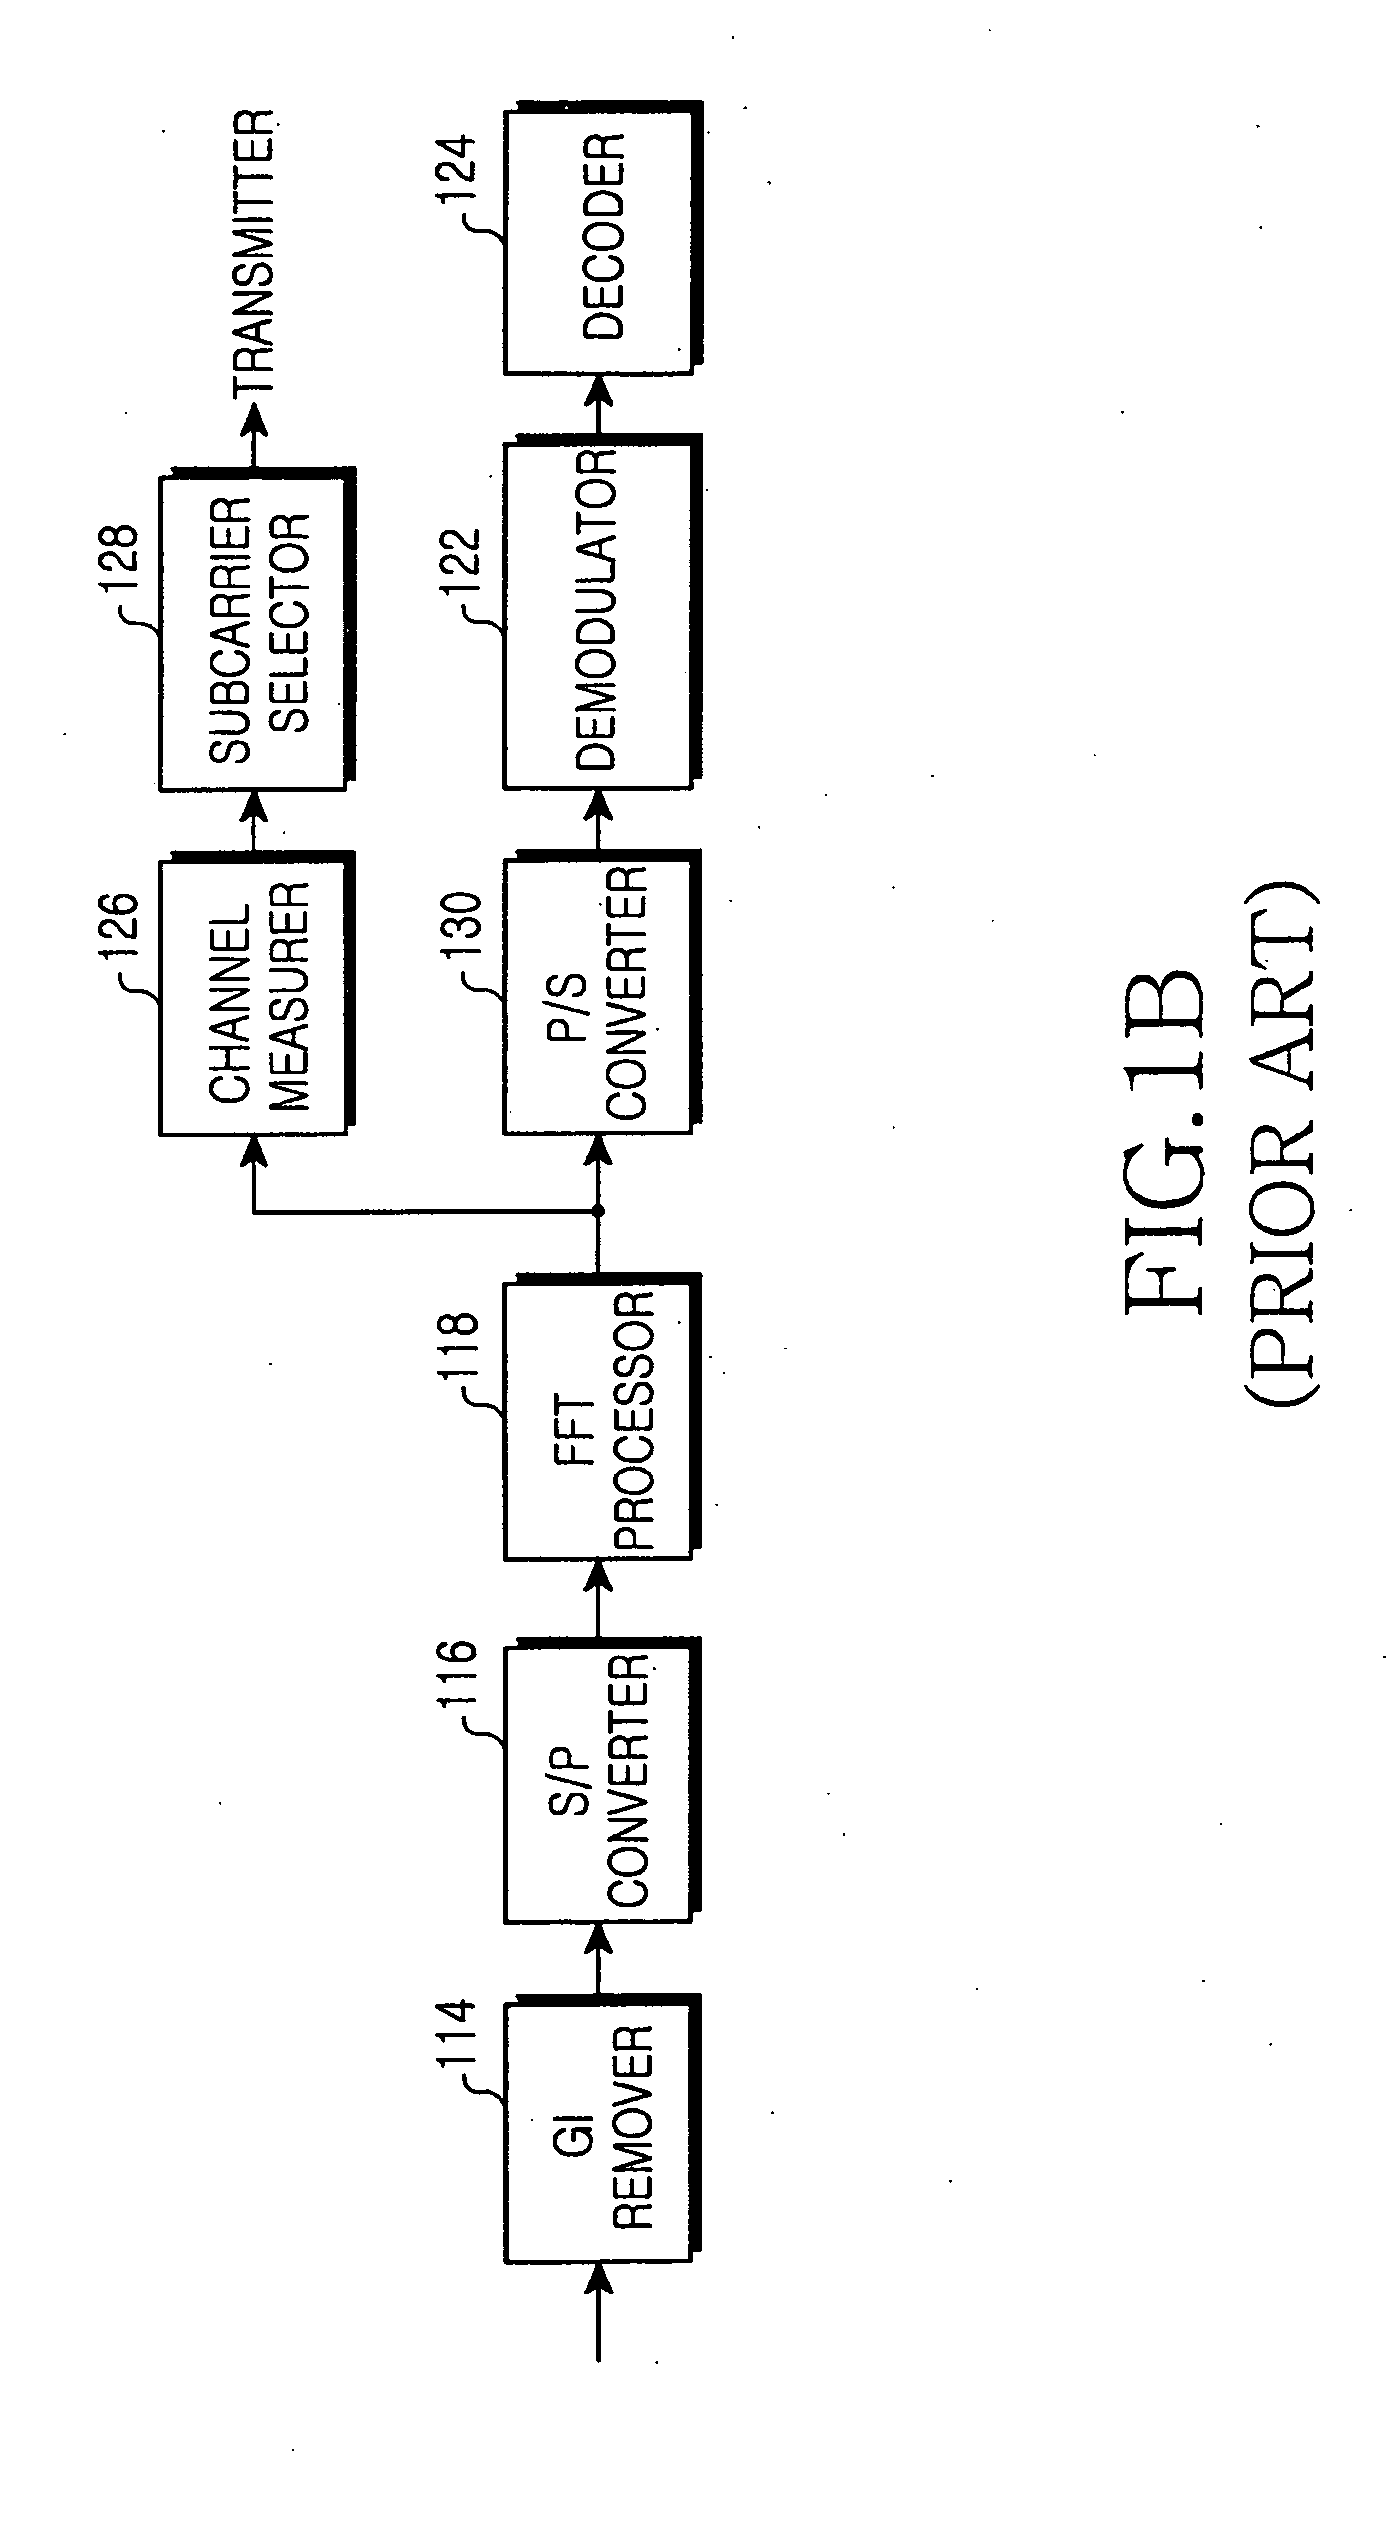 Apparatus and method for transmitting and receiving a signal in an orthogonal frequency division multiplexing system